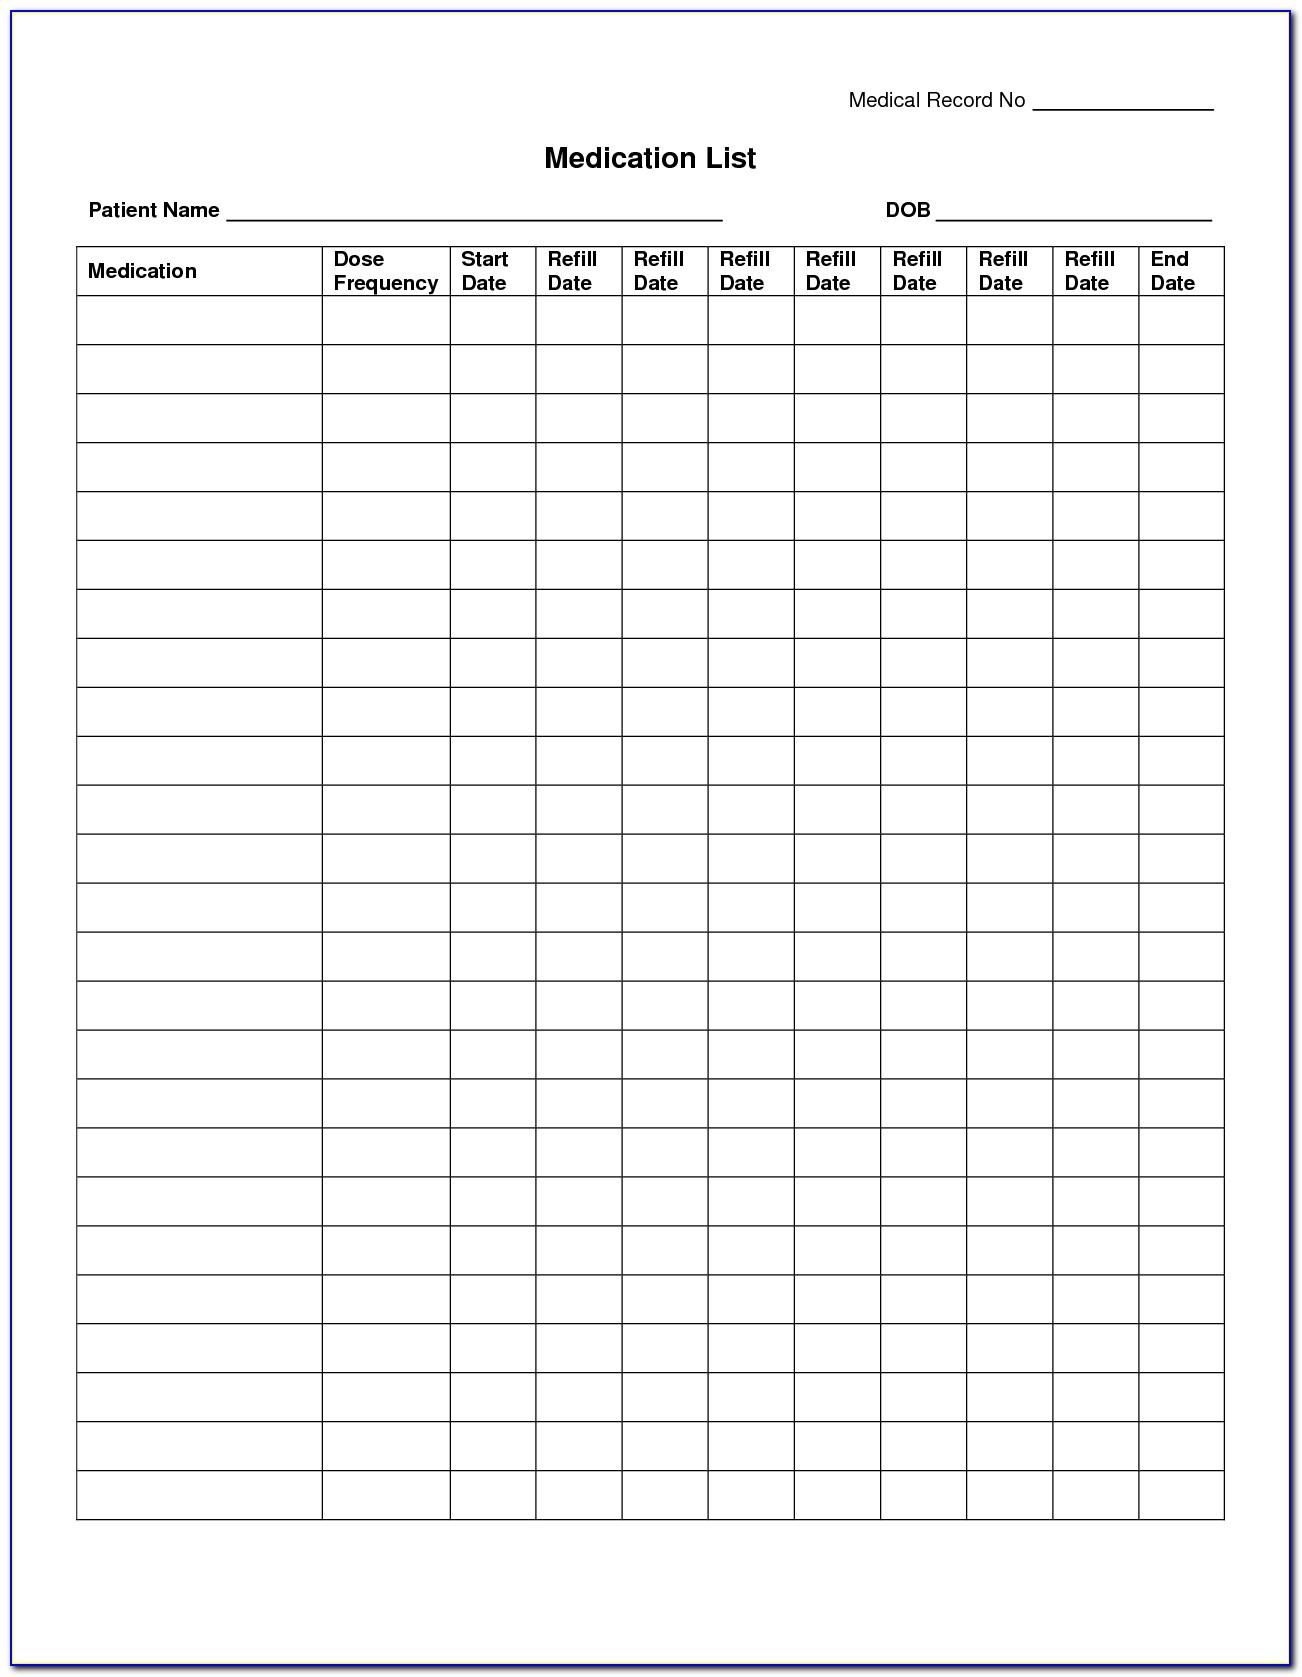 Medication Administration Record Forms For Camp